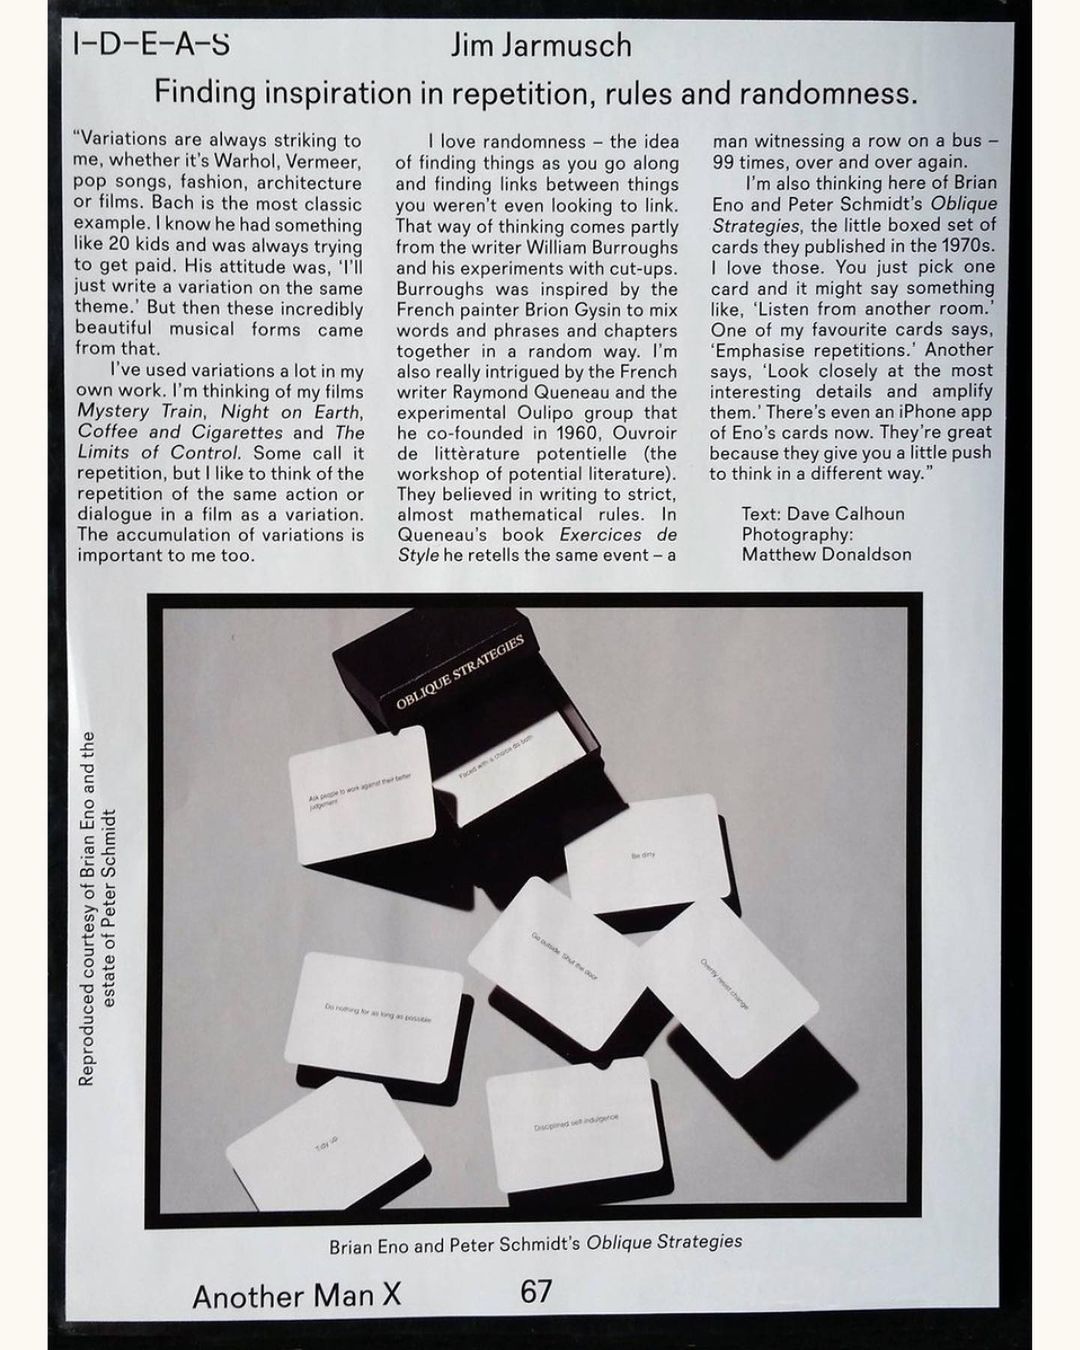 Oblique Strategies by Brian Eno and Peter Schmidt